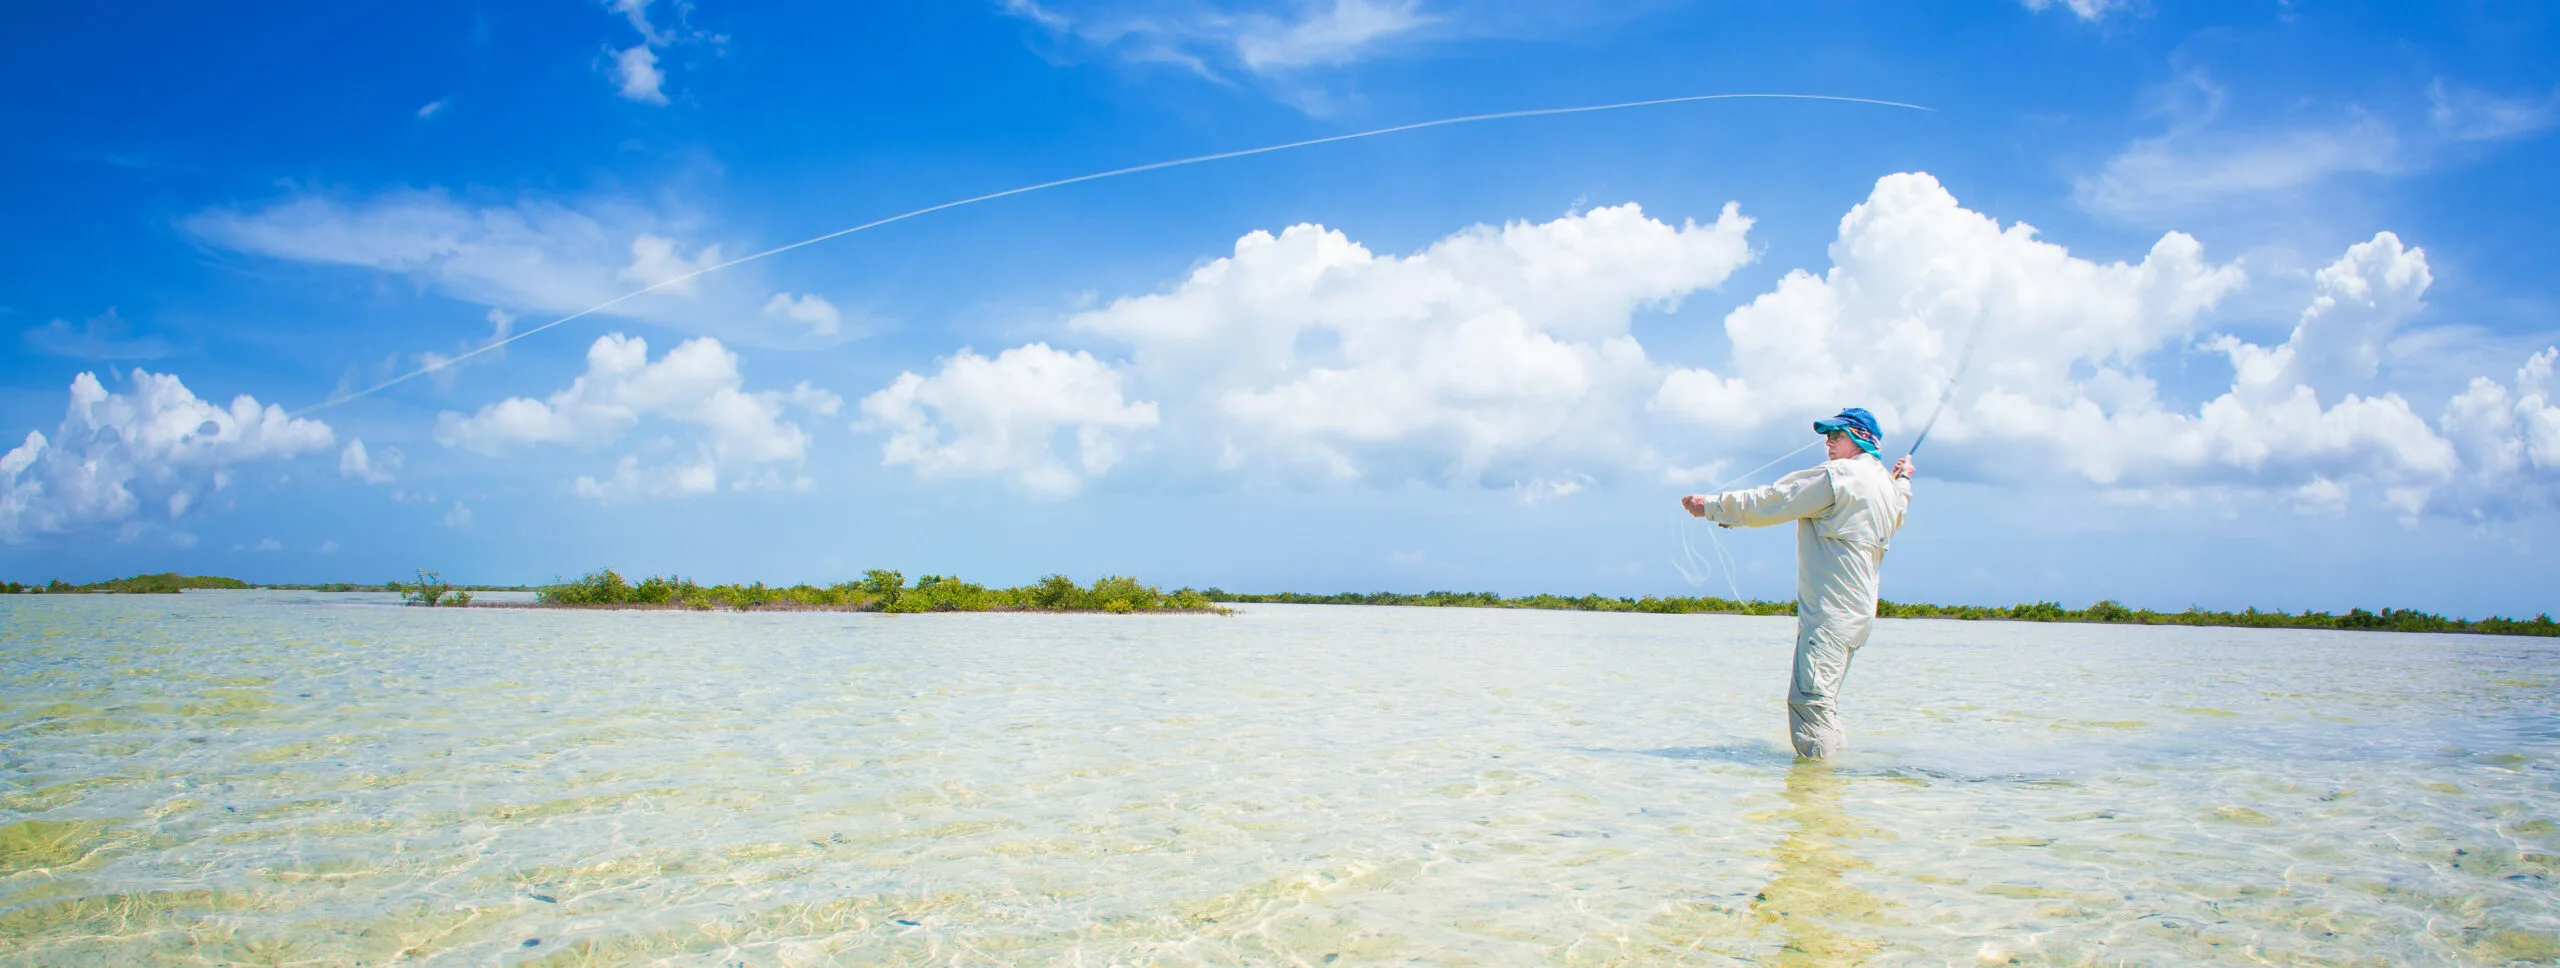 Man in shallow water bonefishing in Turks and Caicos from The Strand